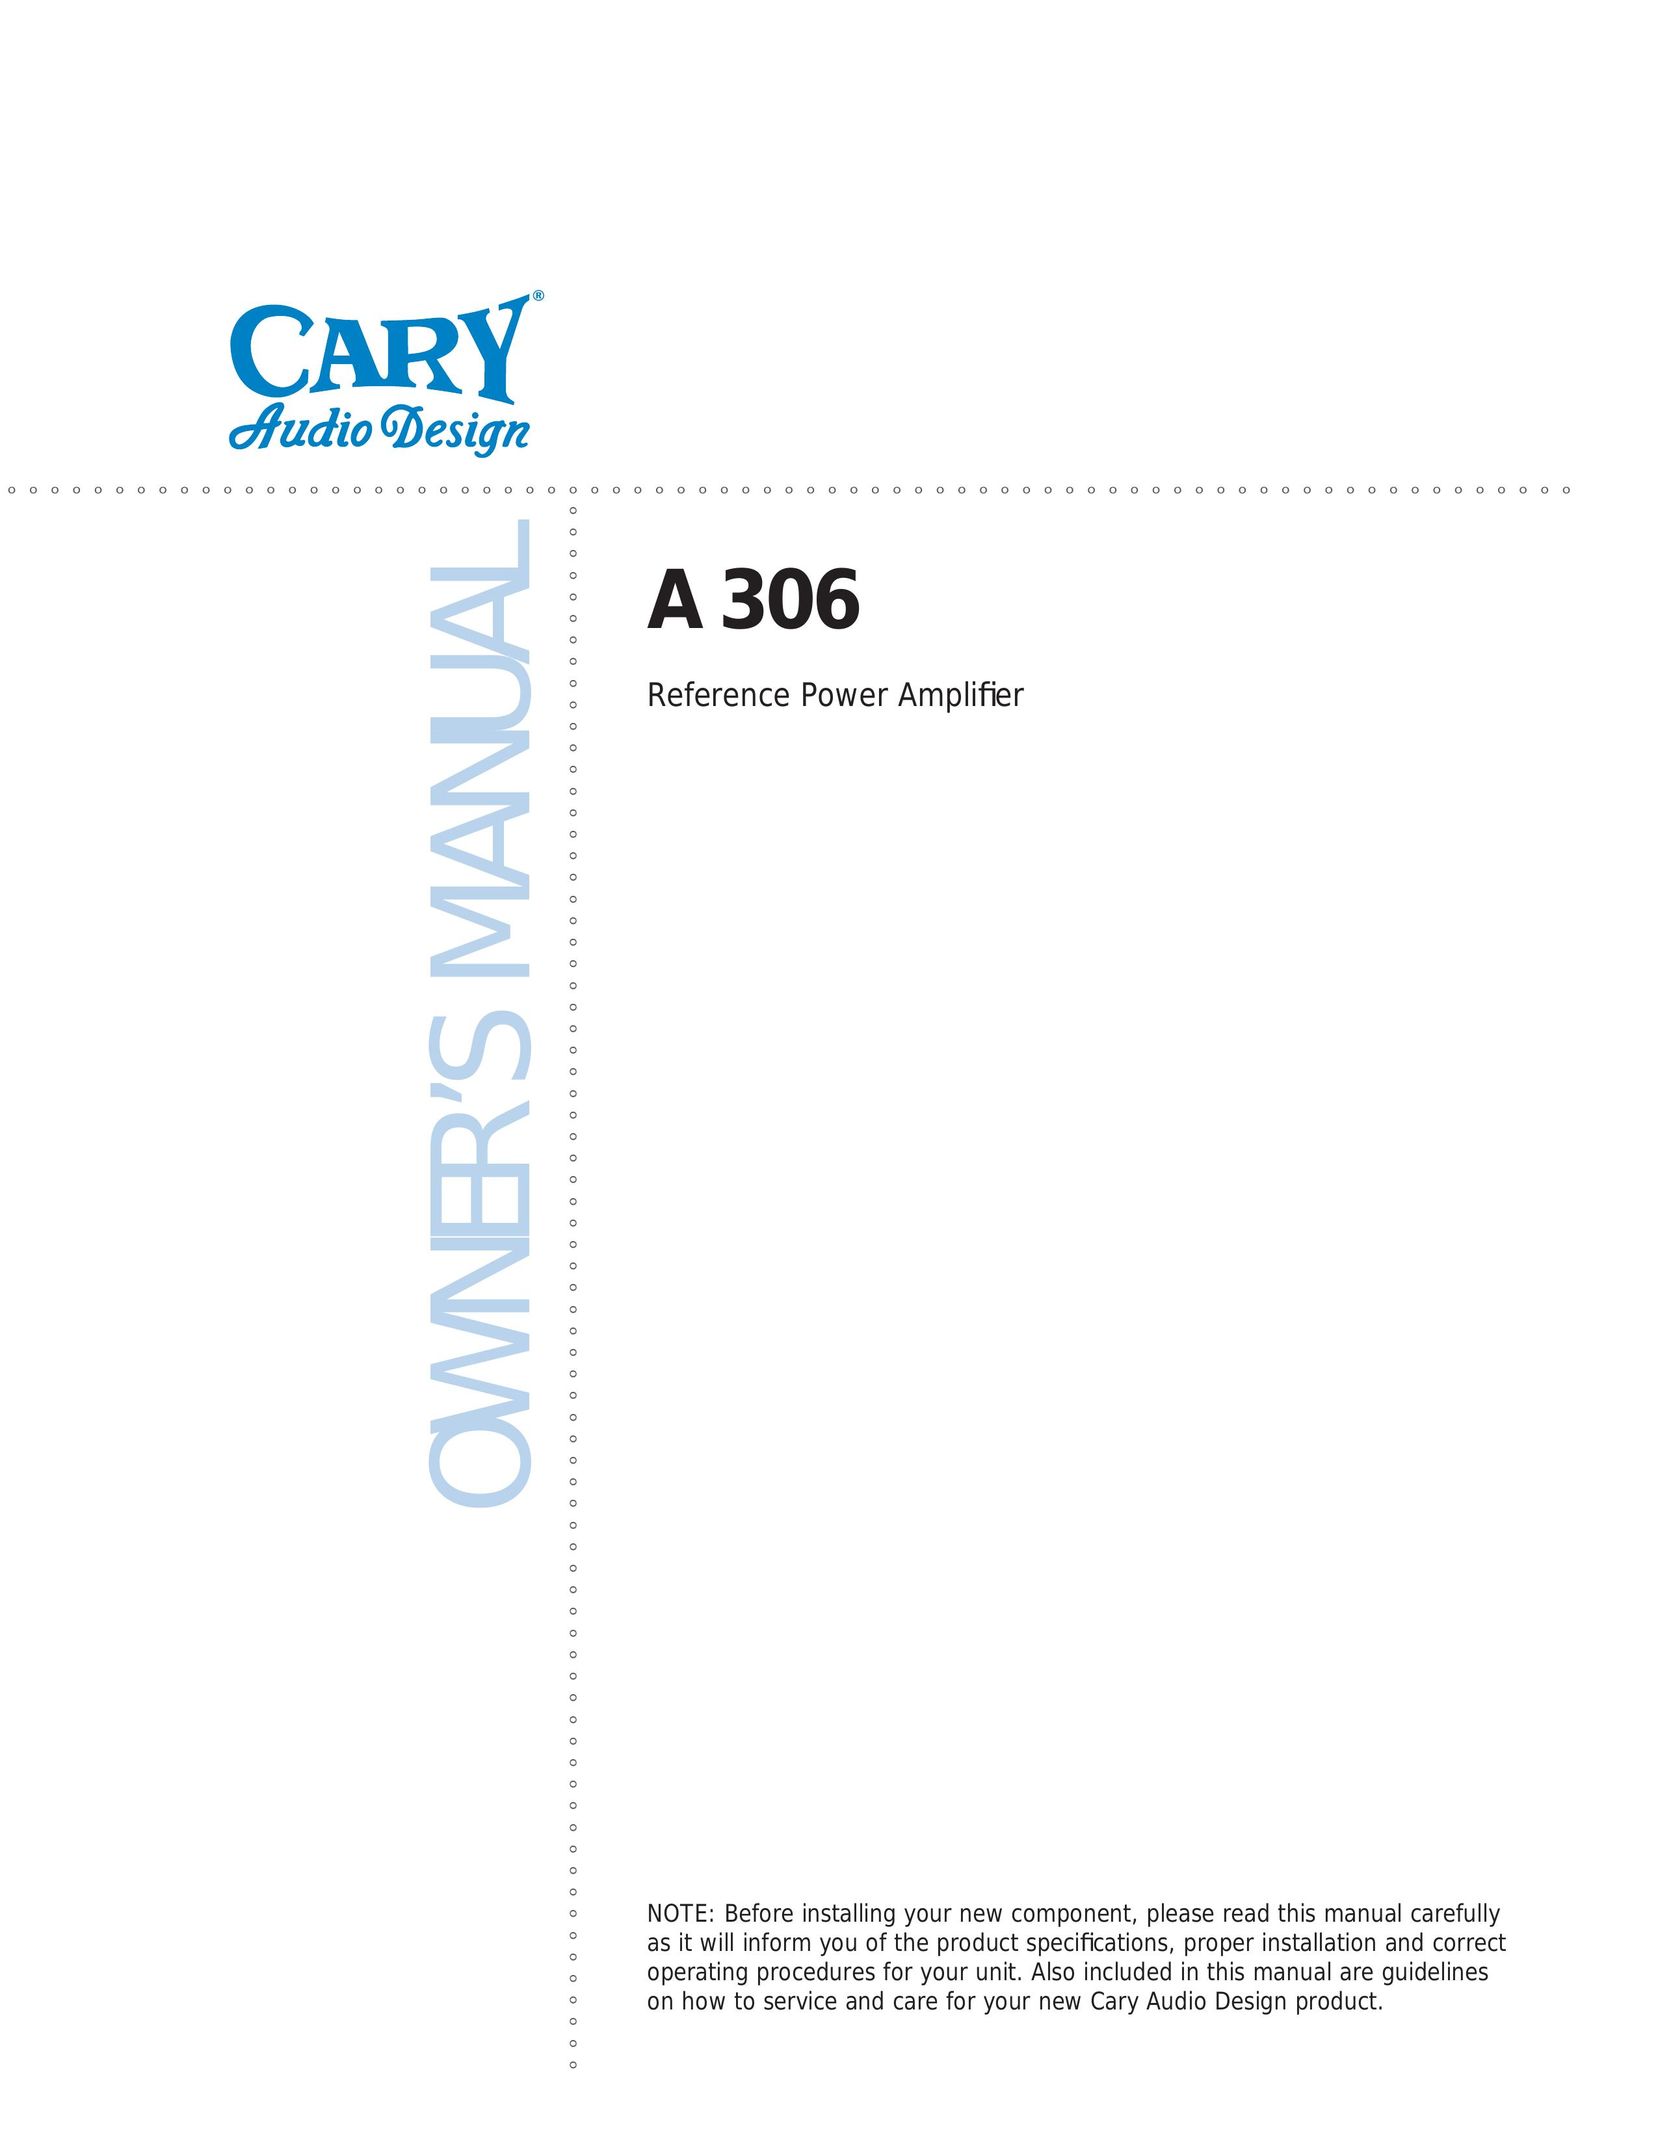 Cary Audio Design A 306 Stereo Amplifier User Manual